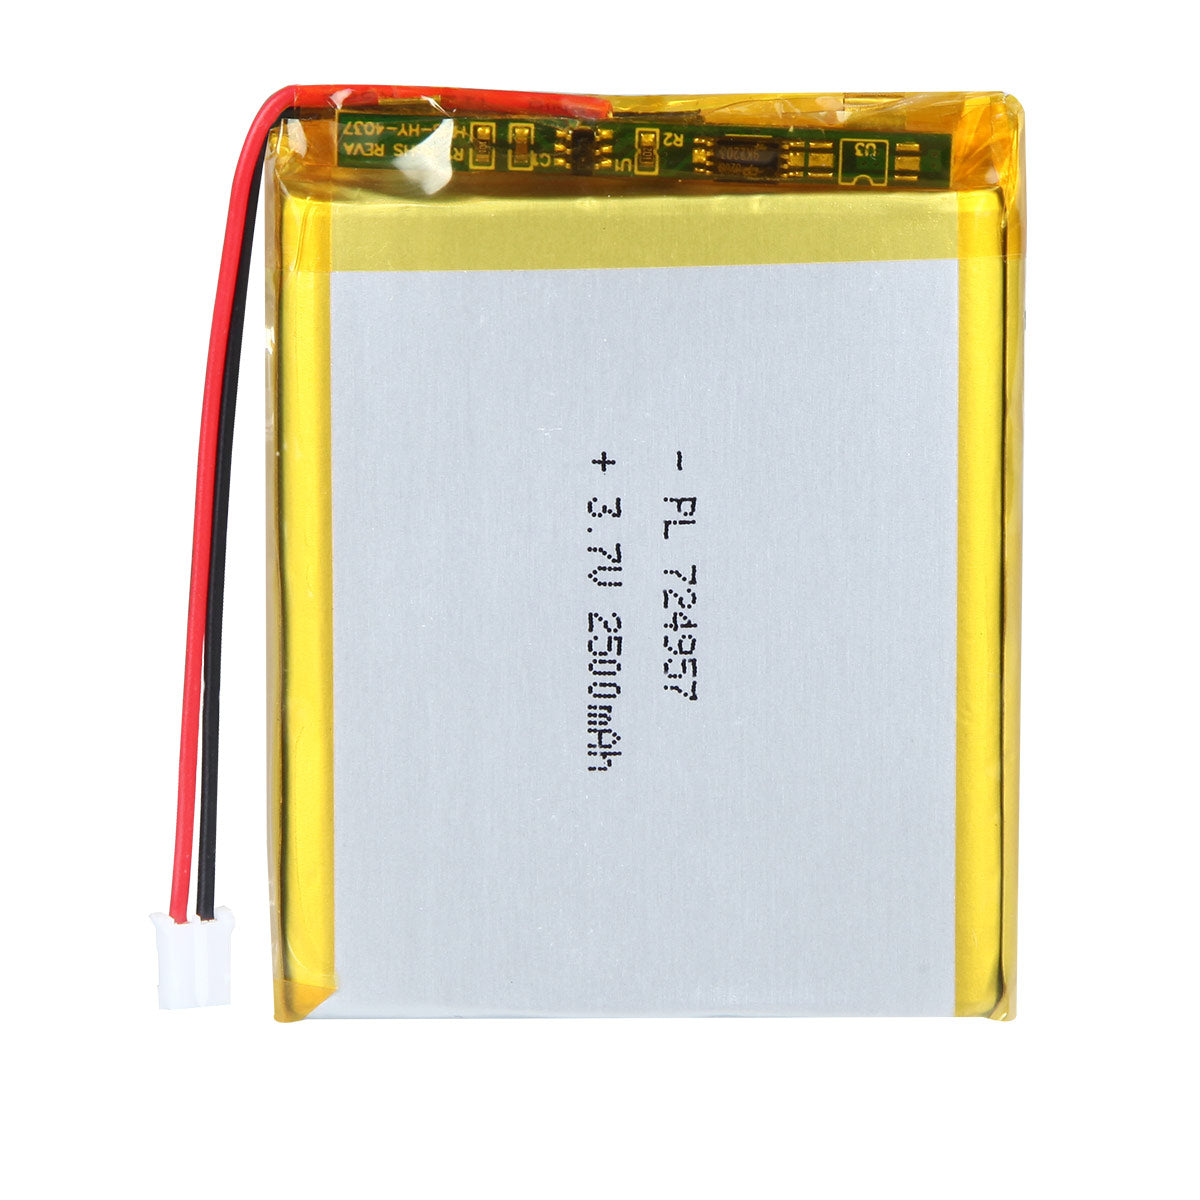 YDL 3.7V 2500mAh 724957 Rechargeable Polymer Lithium-Ion Battery Length 59mm